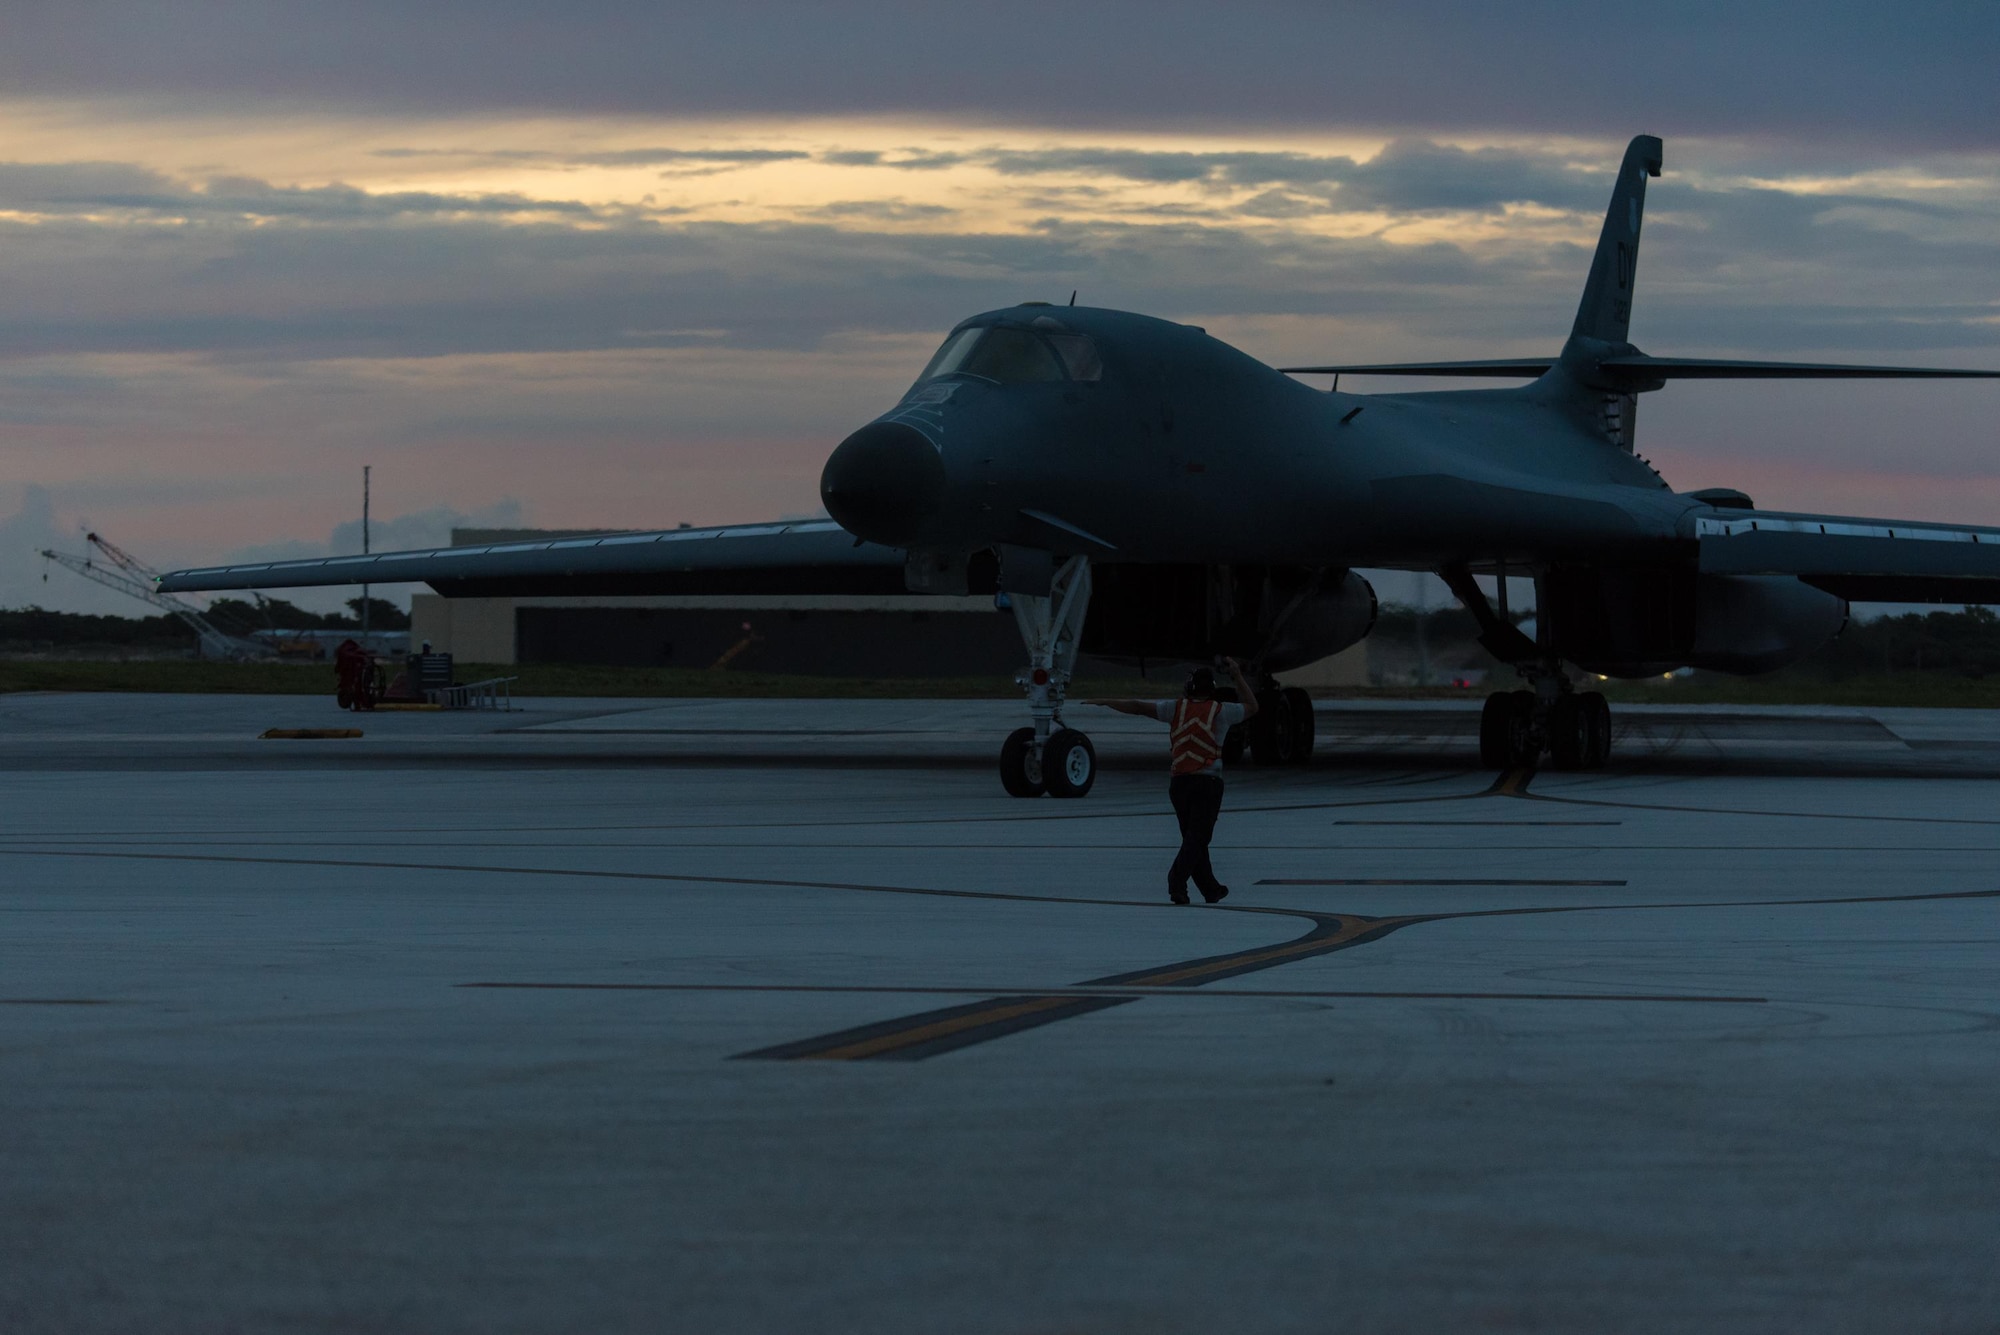 A U.S. Air Force B-1B Lancer assigned to the 9th Expeditionary Bomb Squadron, deployed from Dyess Air Force Base, Texas, is marshaled onto the runway as it prepares to take off from Andersen Air Force Base, Guam, to fly a bilateral mission with two Japan Air Self-Defense Force F-15’s over the East China Sea, July 6, 2017. Bilateral training fosters increased interoperability between Japan and U.S. aircraft. Participating in bilateral training enables the operational units to improve their combined capabilities and tactical skills, while also building bilateral confidence and strong working relationships. (U.S. Air Force photo by Airman 1st Class Jacob Skovo)